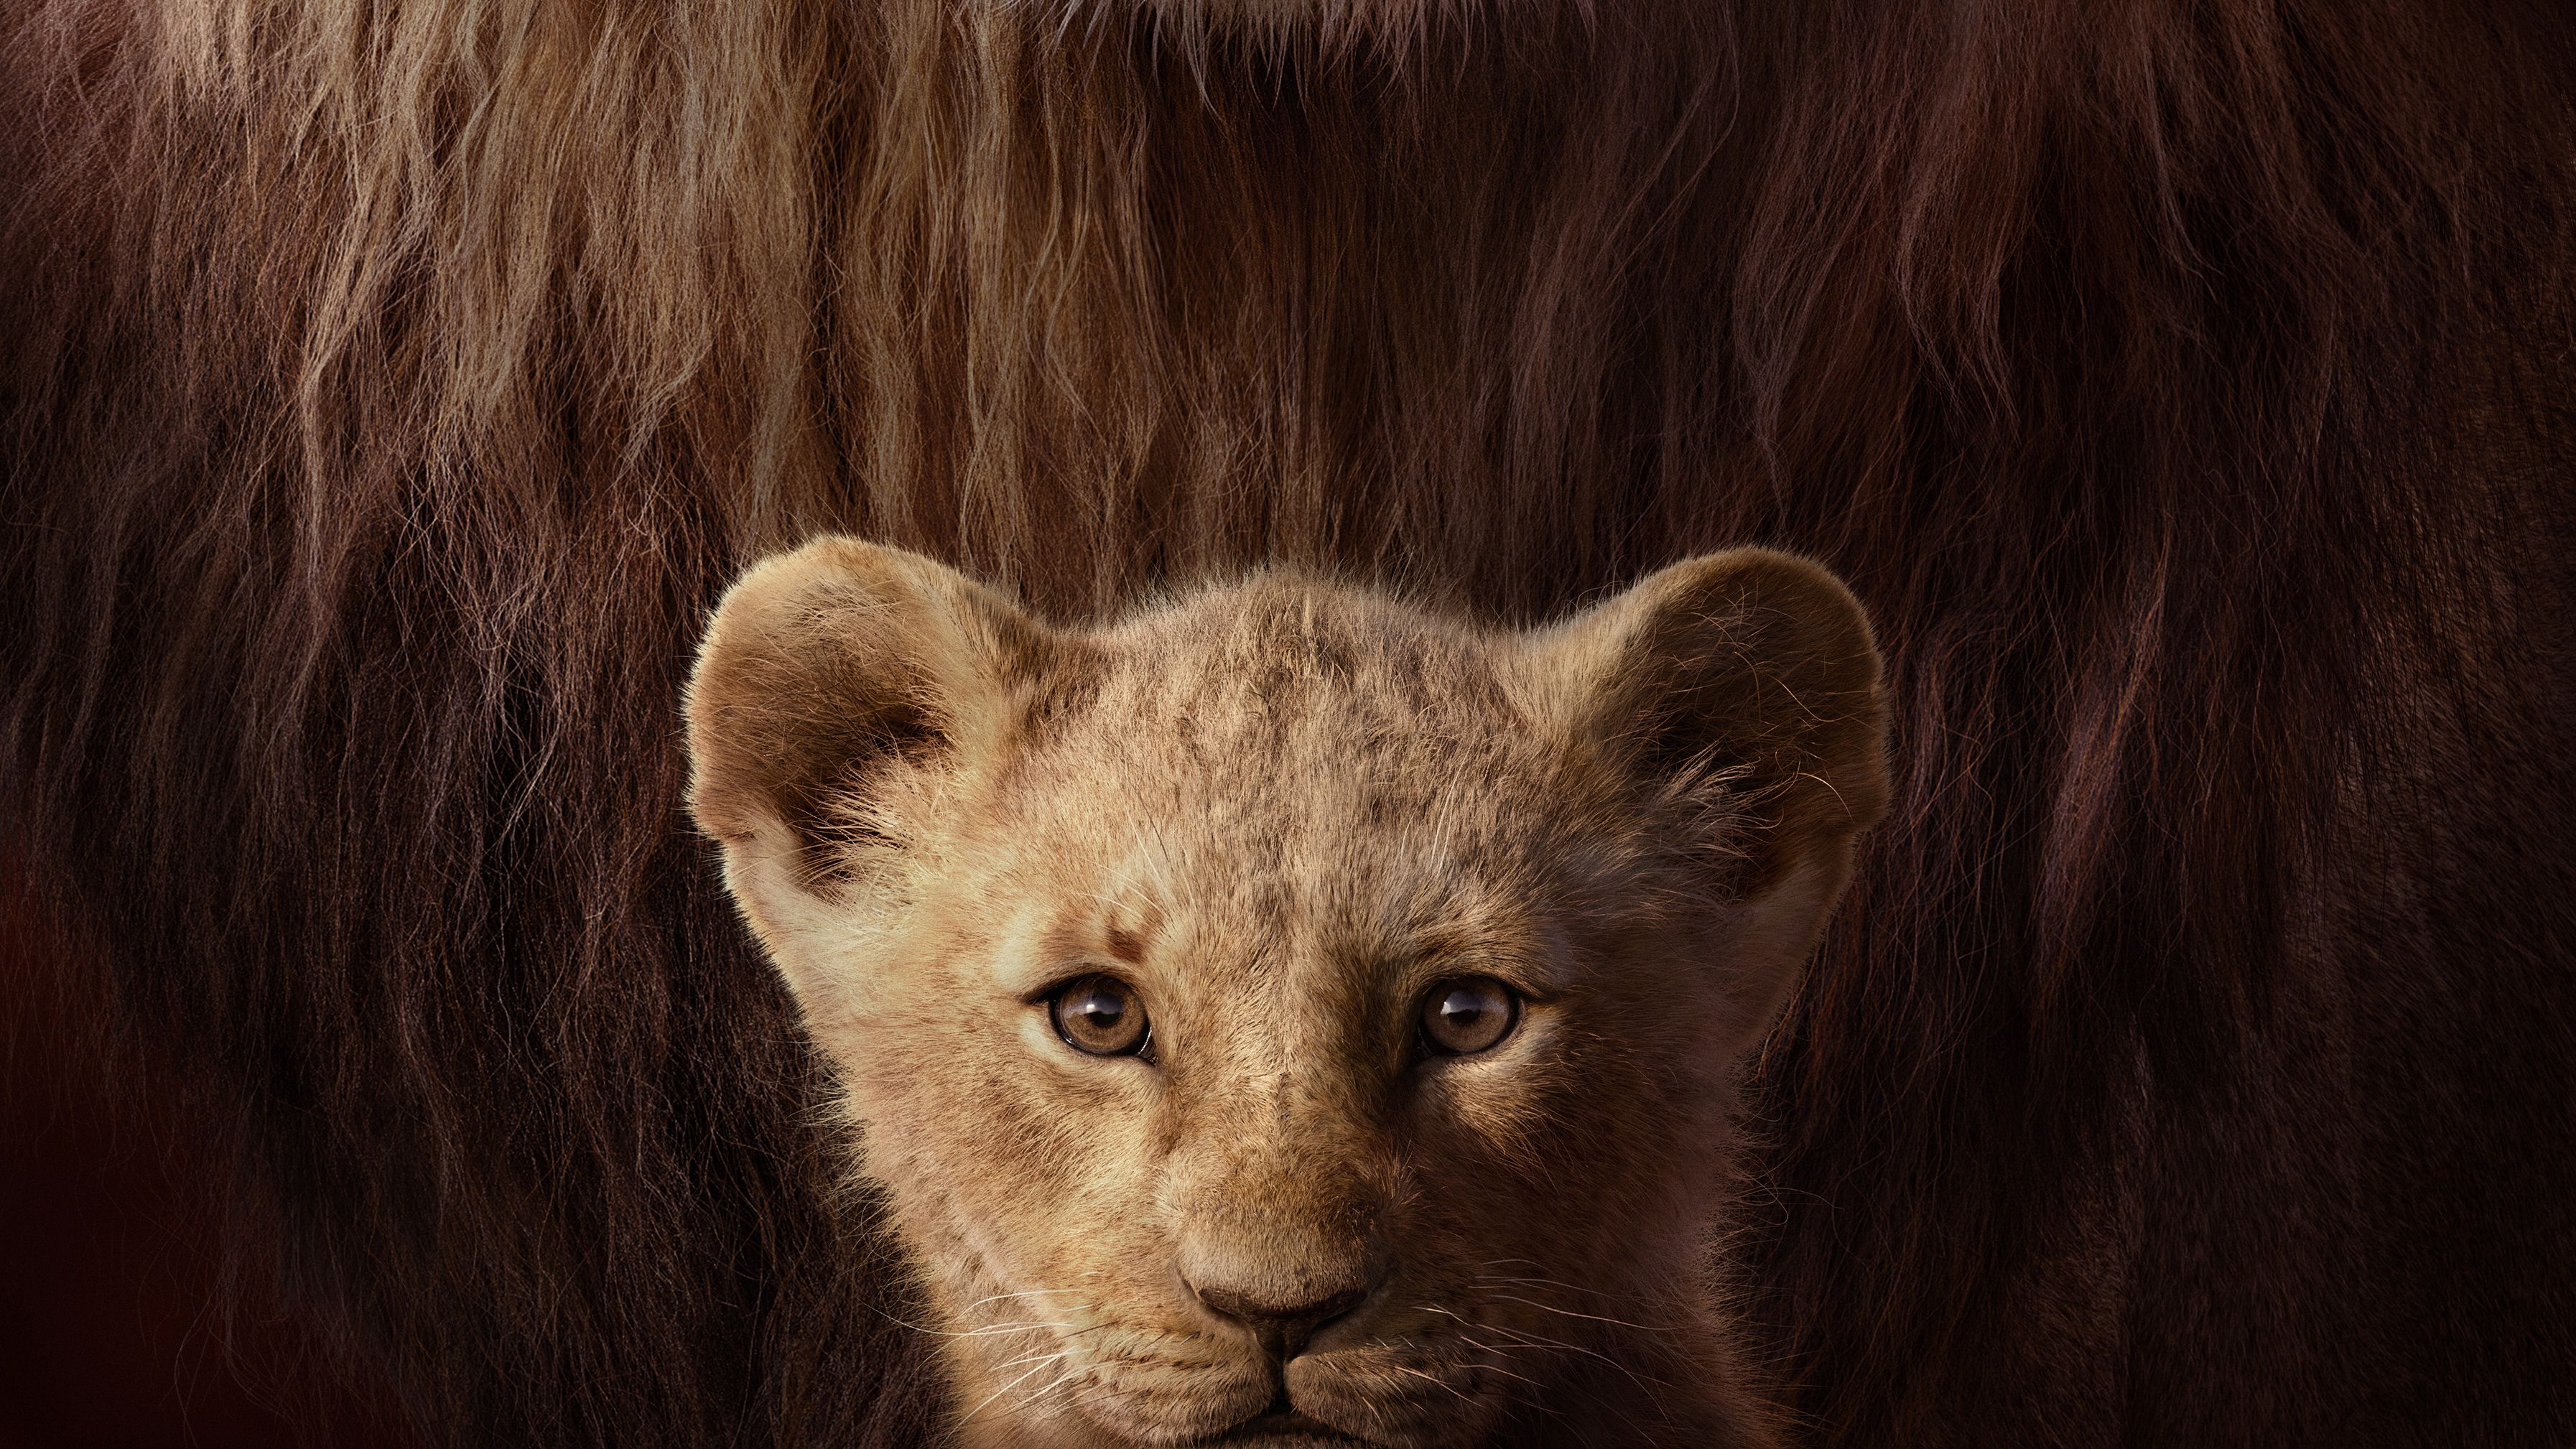 The Lion King Key Art 4k, HD Movies, 4k Wallpapers, Image, Backgrounds, Photos and Pictures